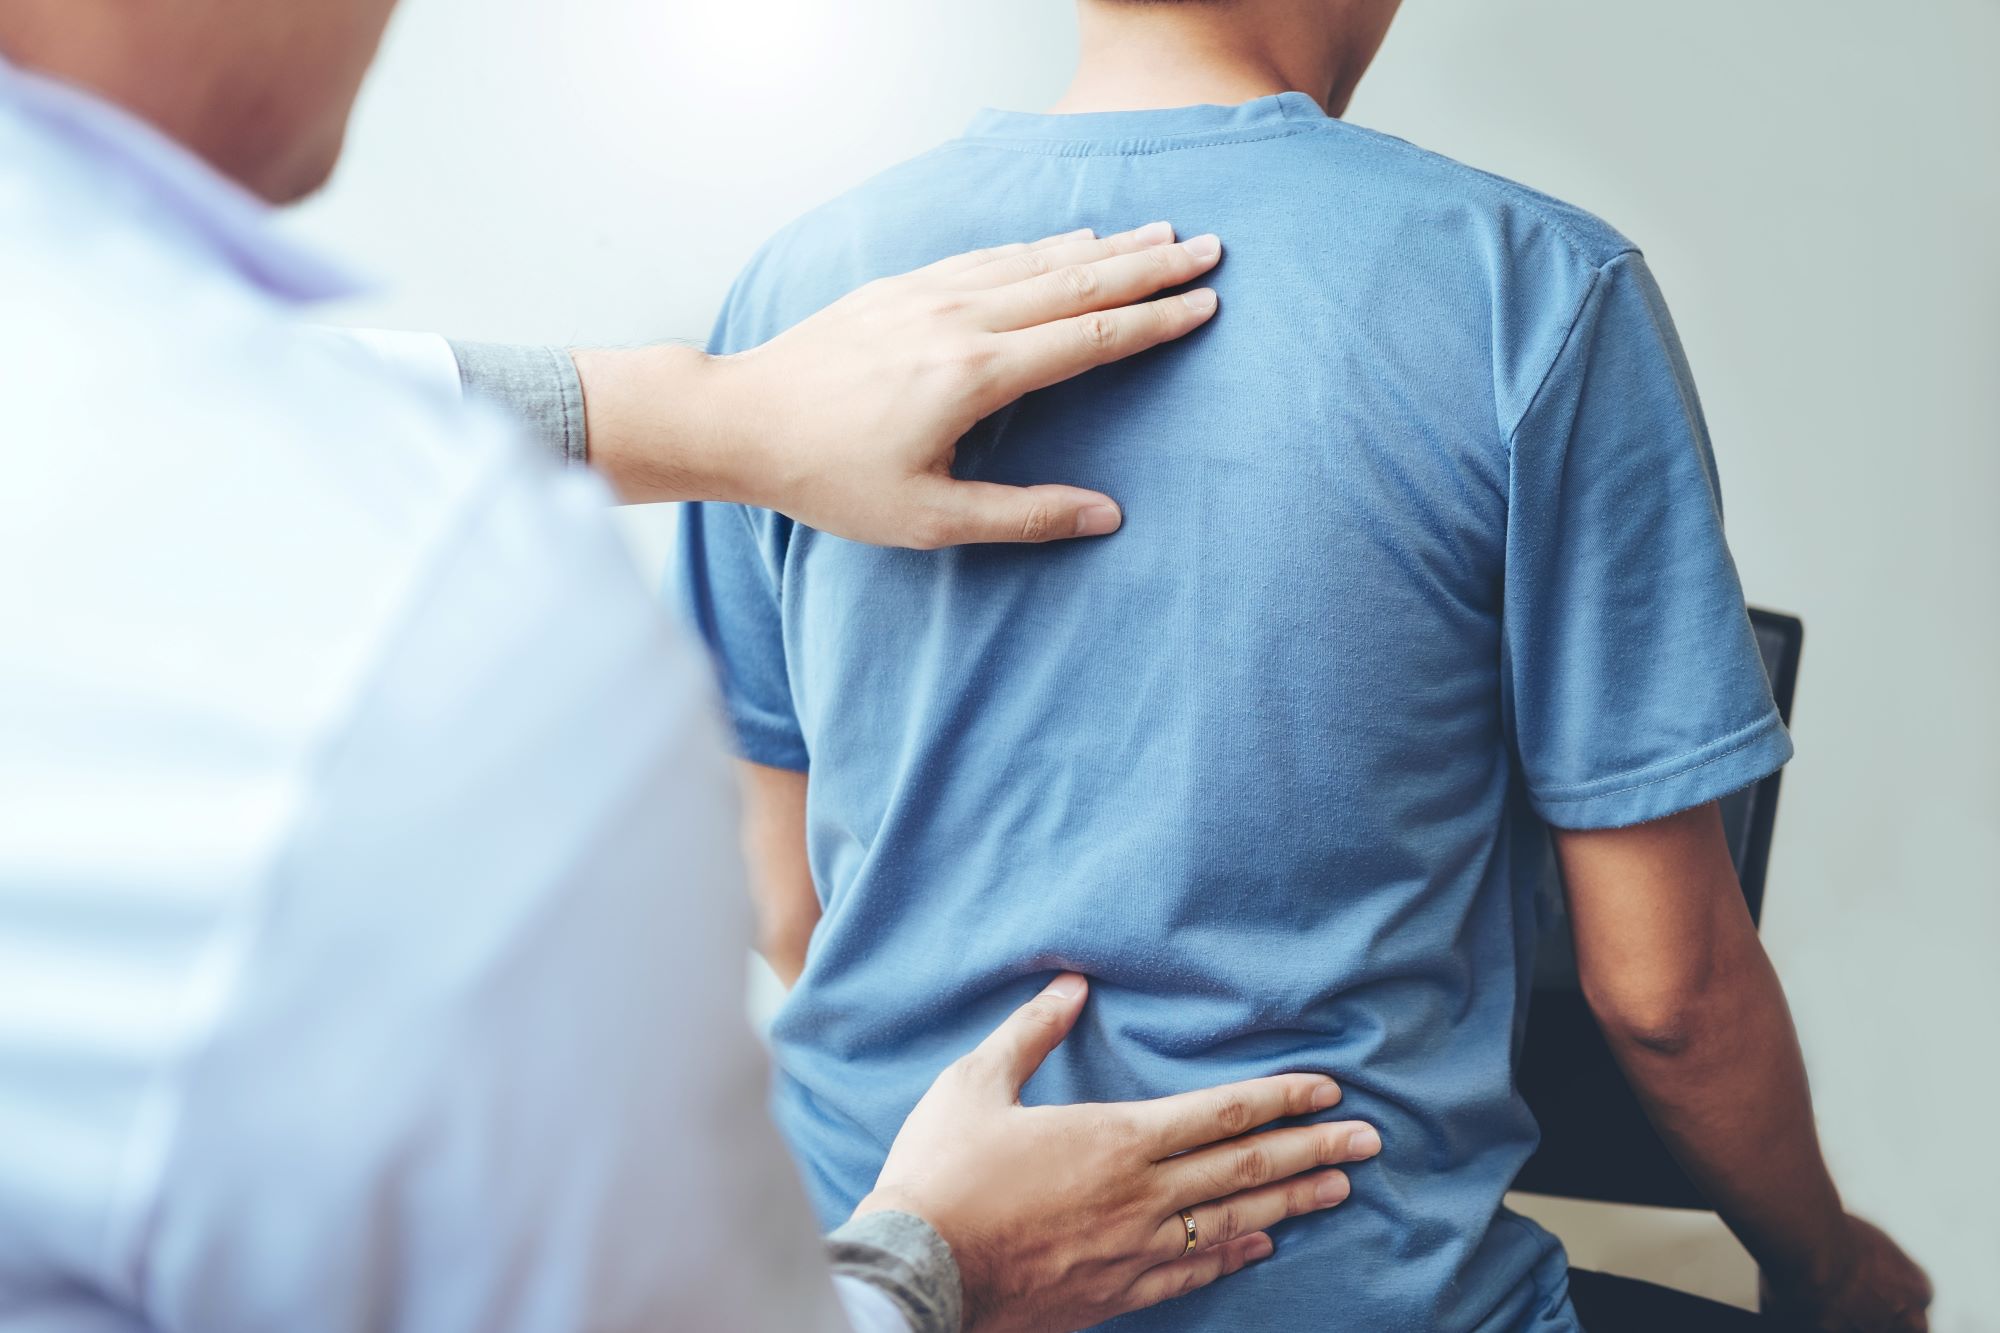 7 Warning Signs You Should See A Spine Specialist